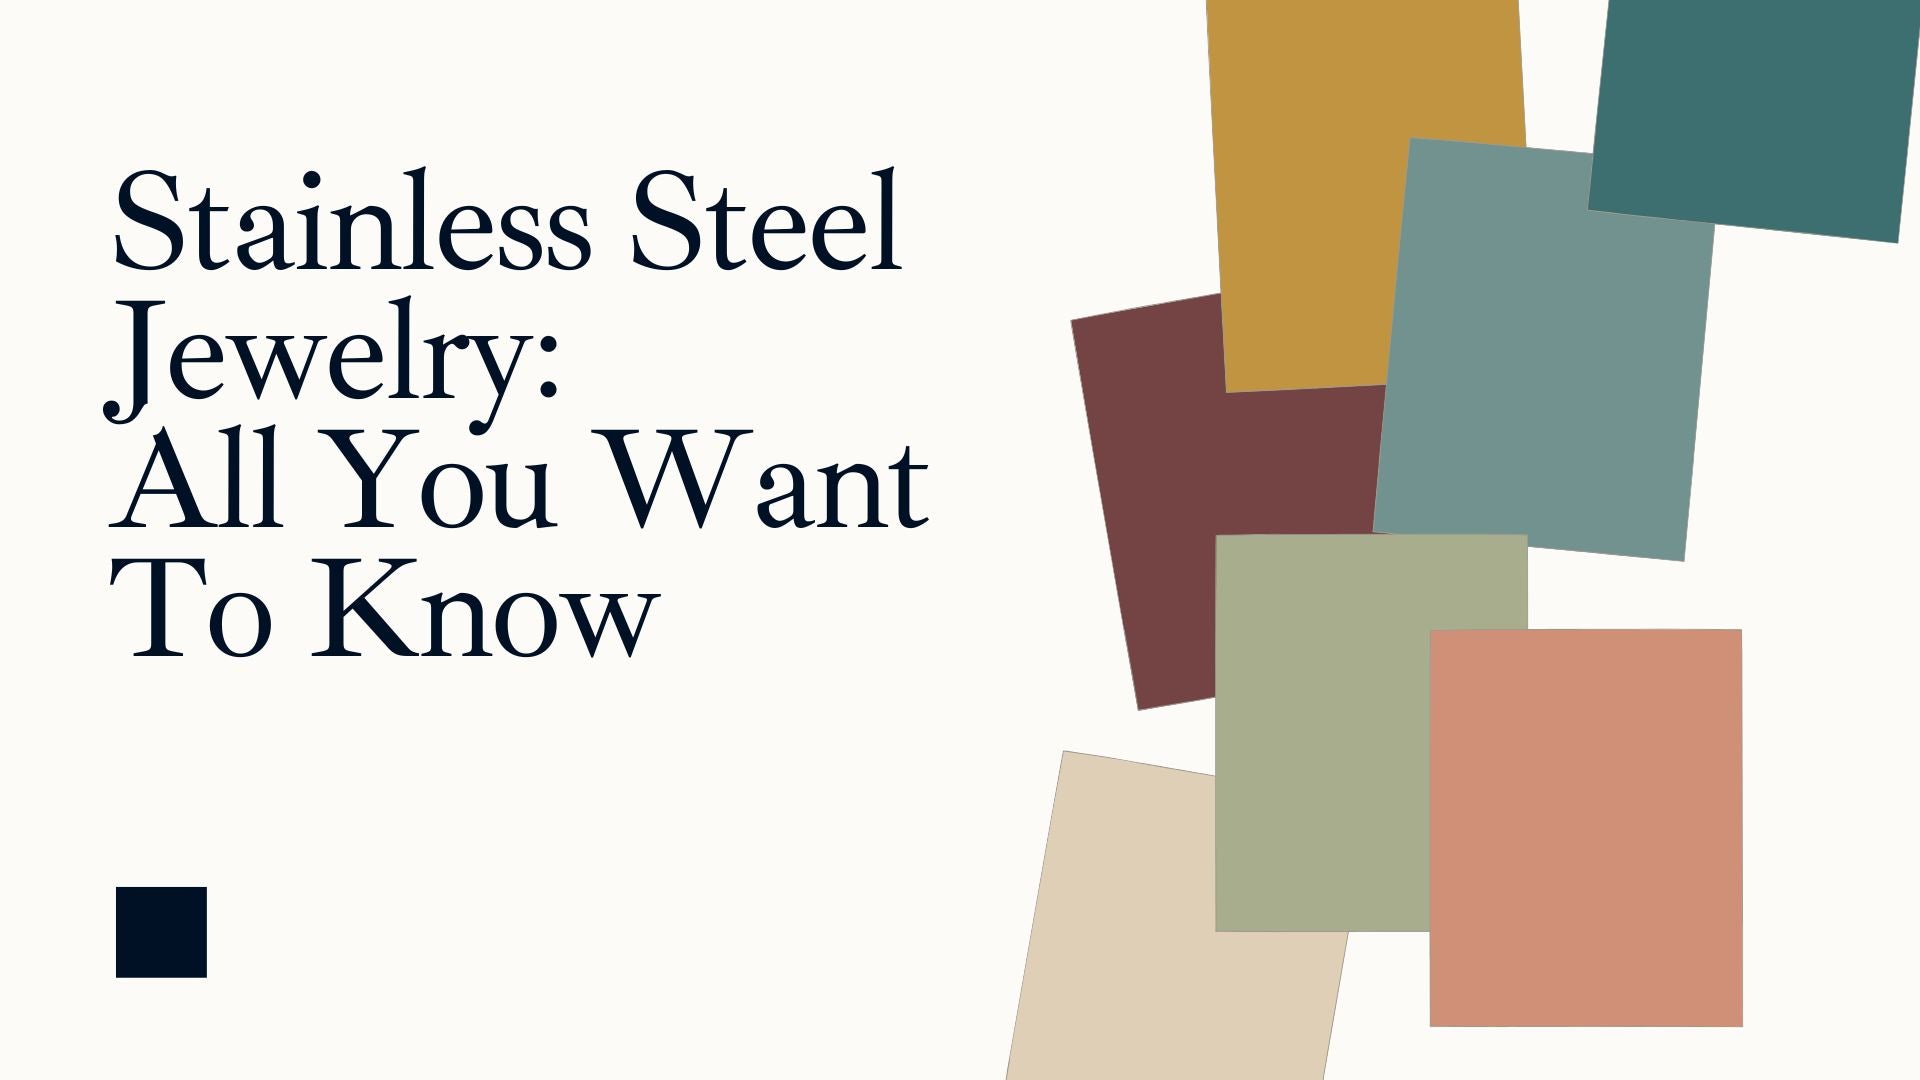 Stainless Steel Jewelry: All You Want To Know